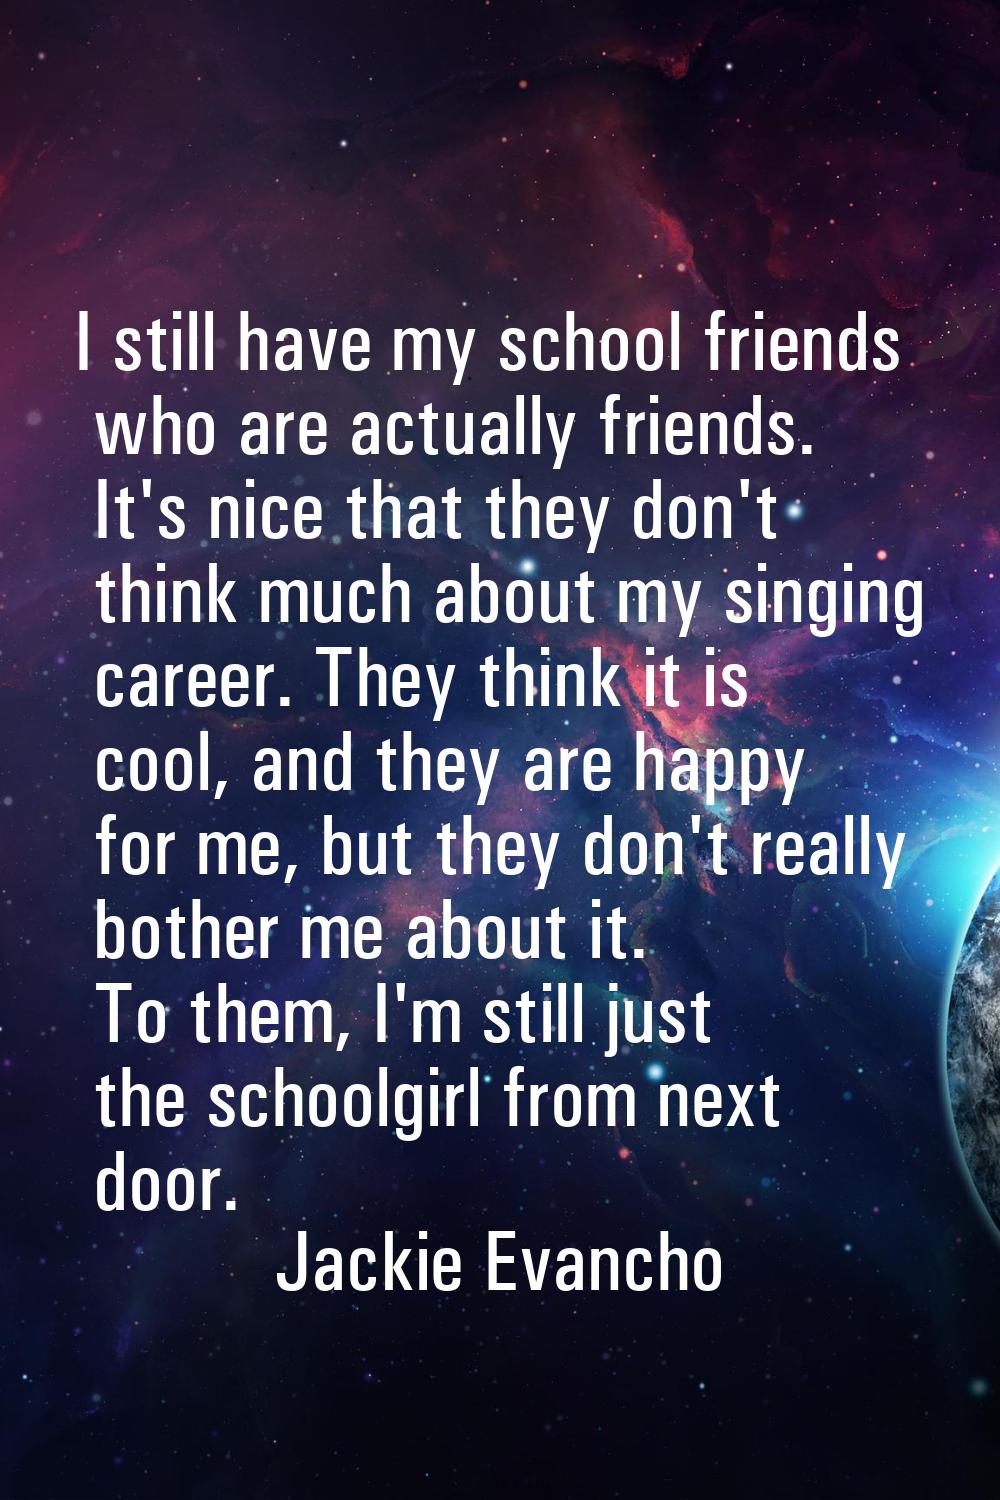 I still have my school friends who are actually friends. It's nice that they don't think much about